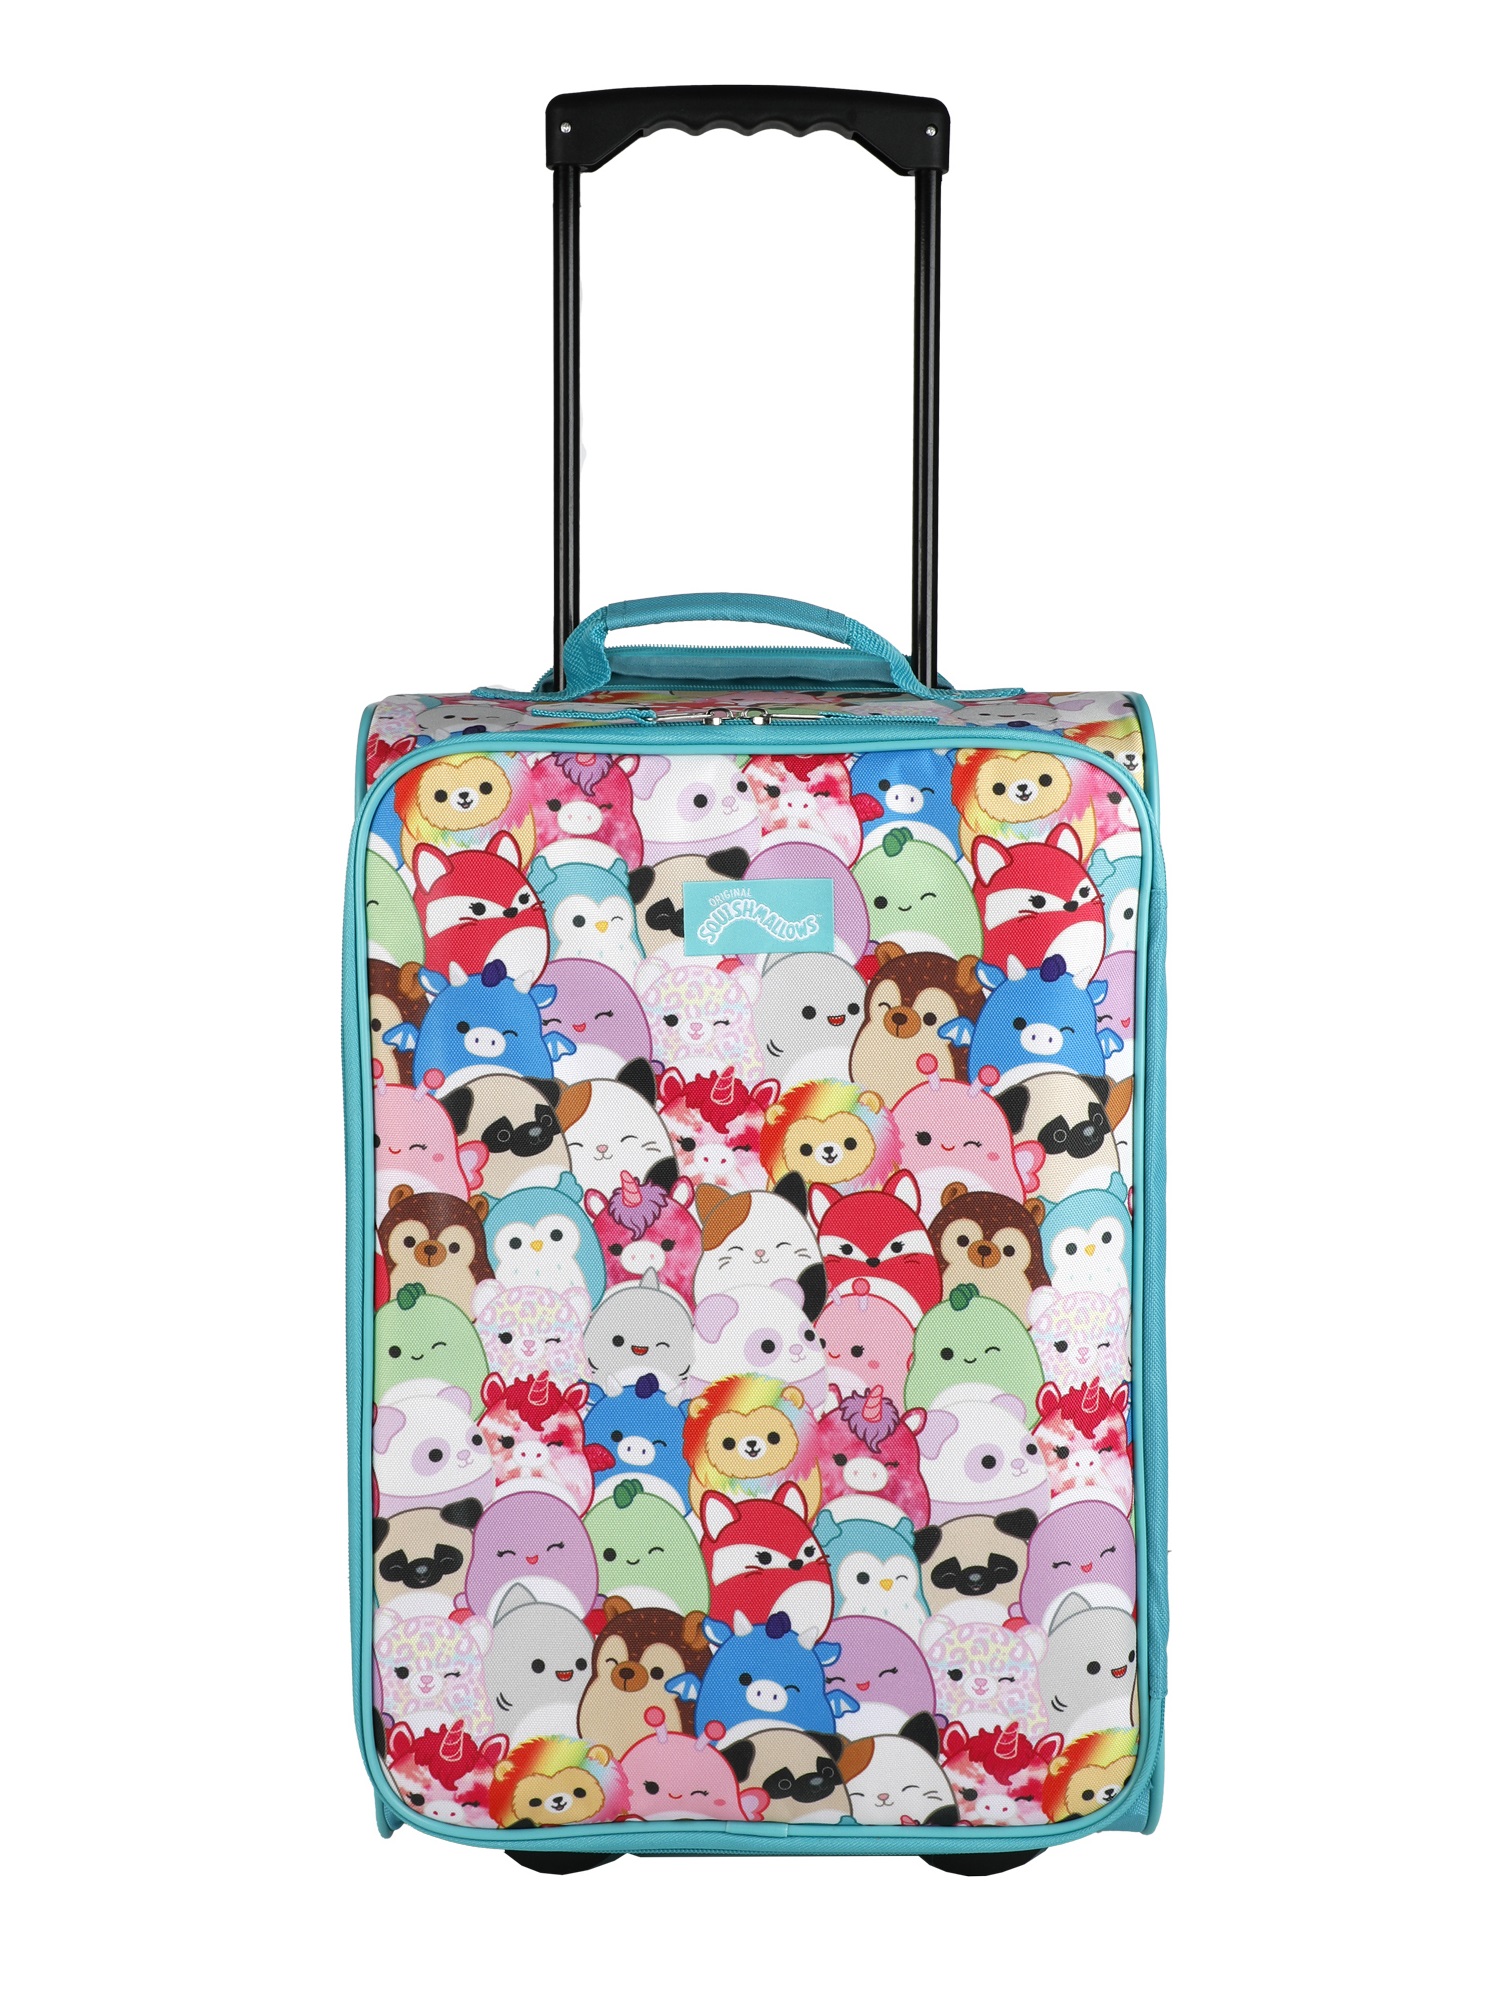 Squishmallows Cameron Cat 2pc  Travel Set with 18" Luggage and 10" Plush Backpack - image 5 of 9